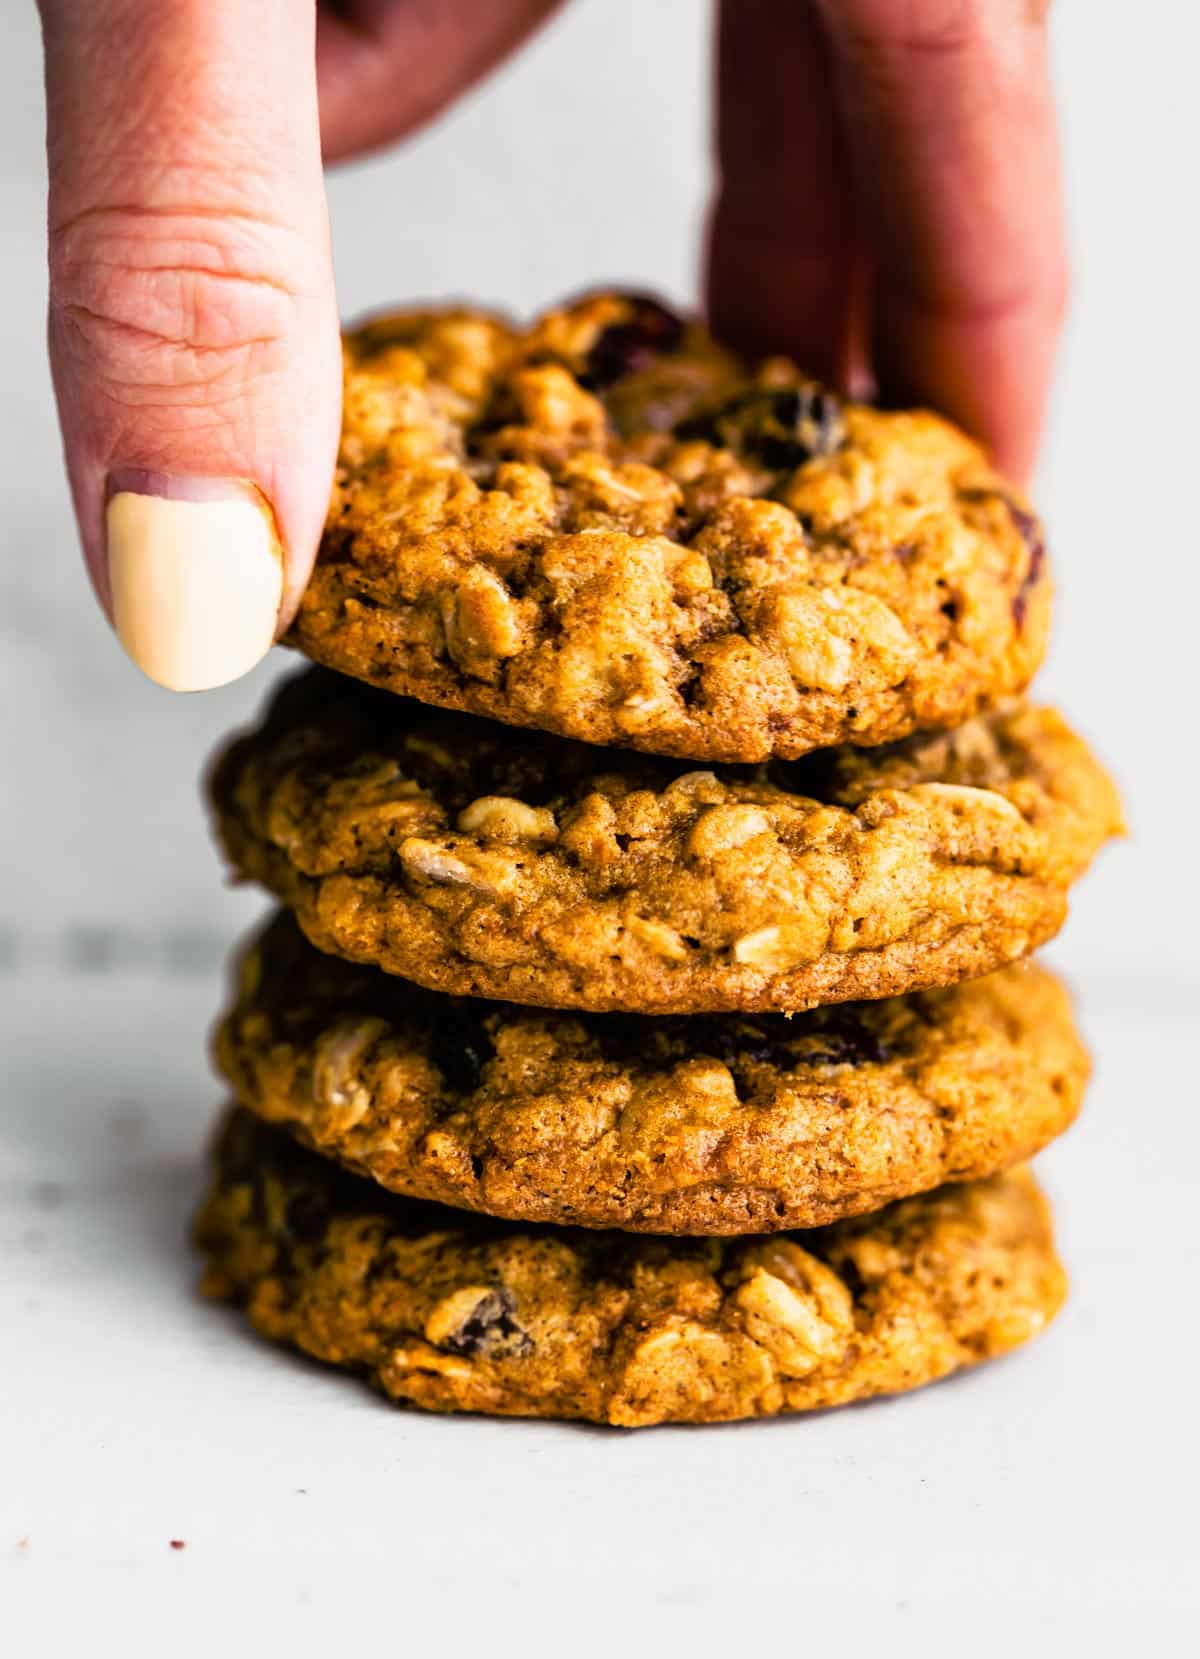 A woman's hand grabbing a gluten free oatmeal cookie from a stack of four cookies.